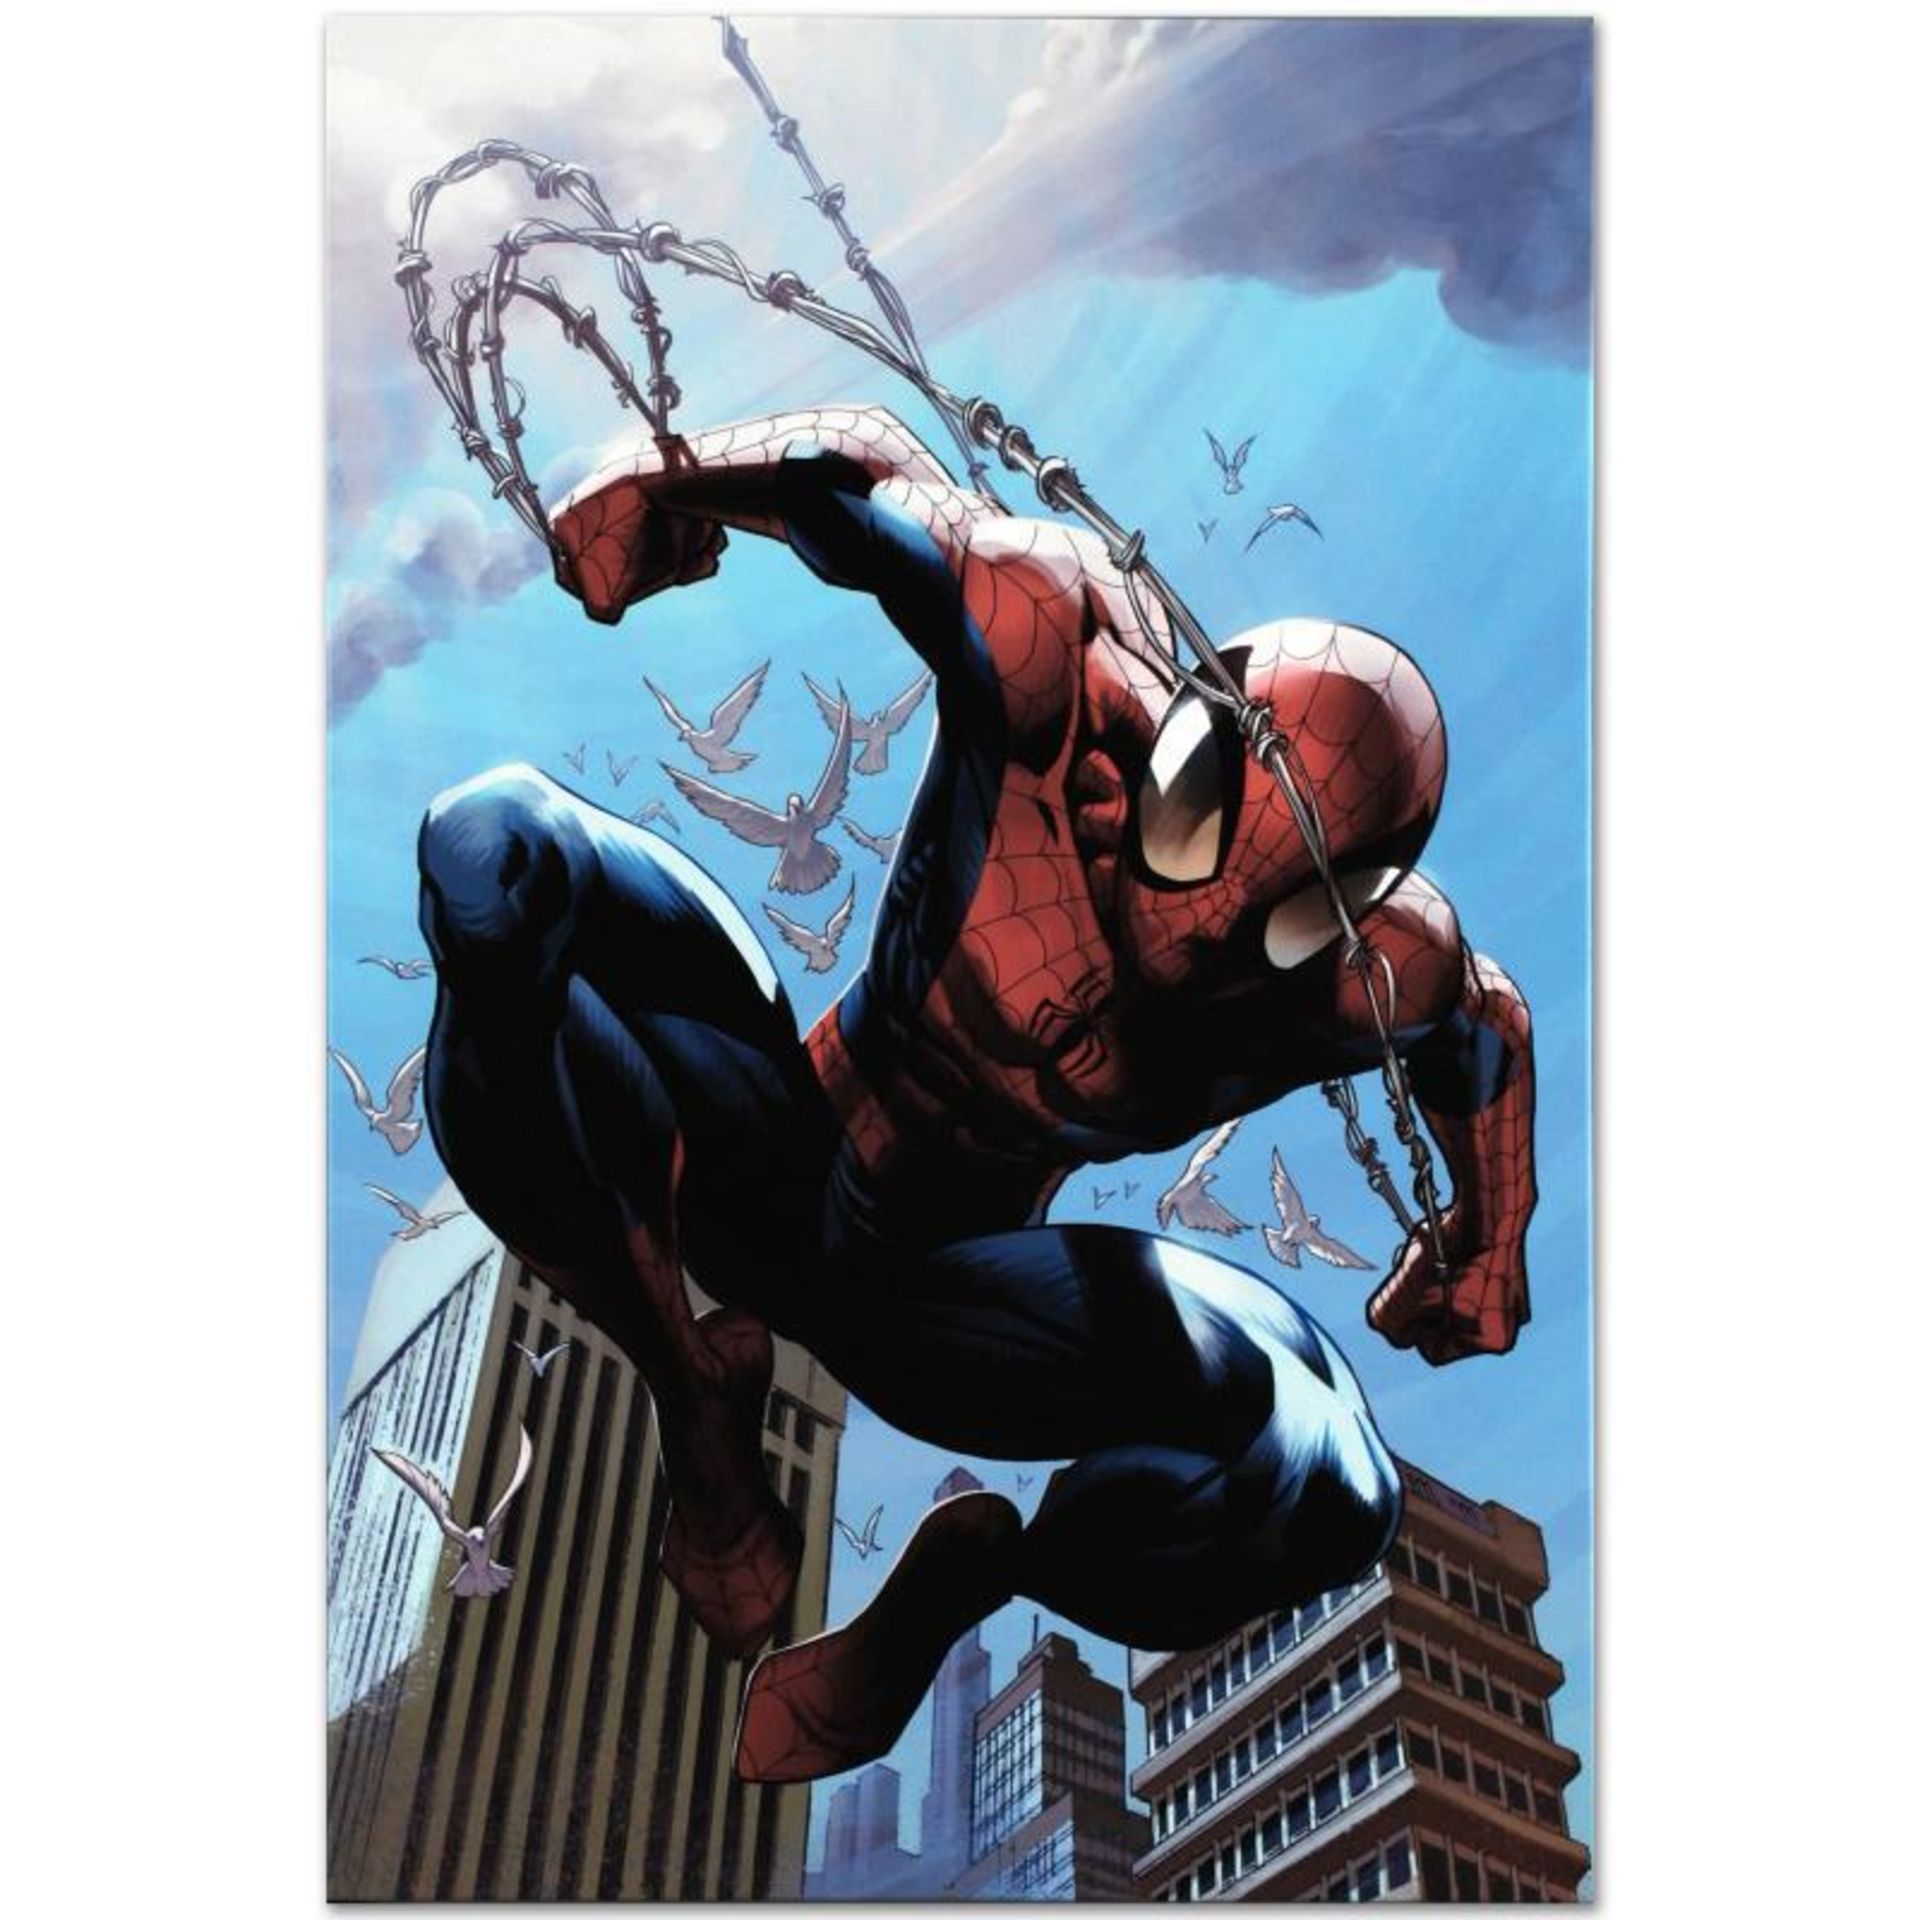 Marvel Comics "Ultimate Spider-Man #156" Numbered Limited Edition Giclee on Canv